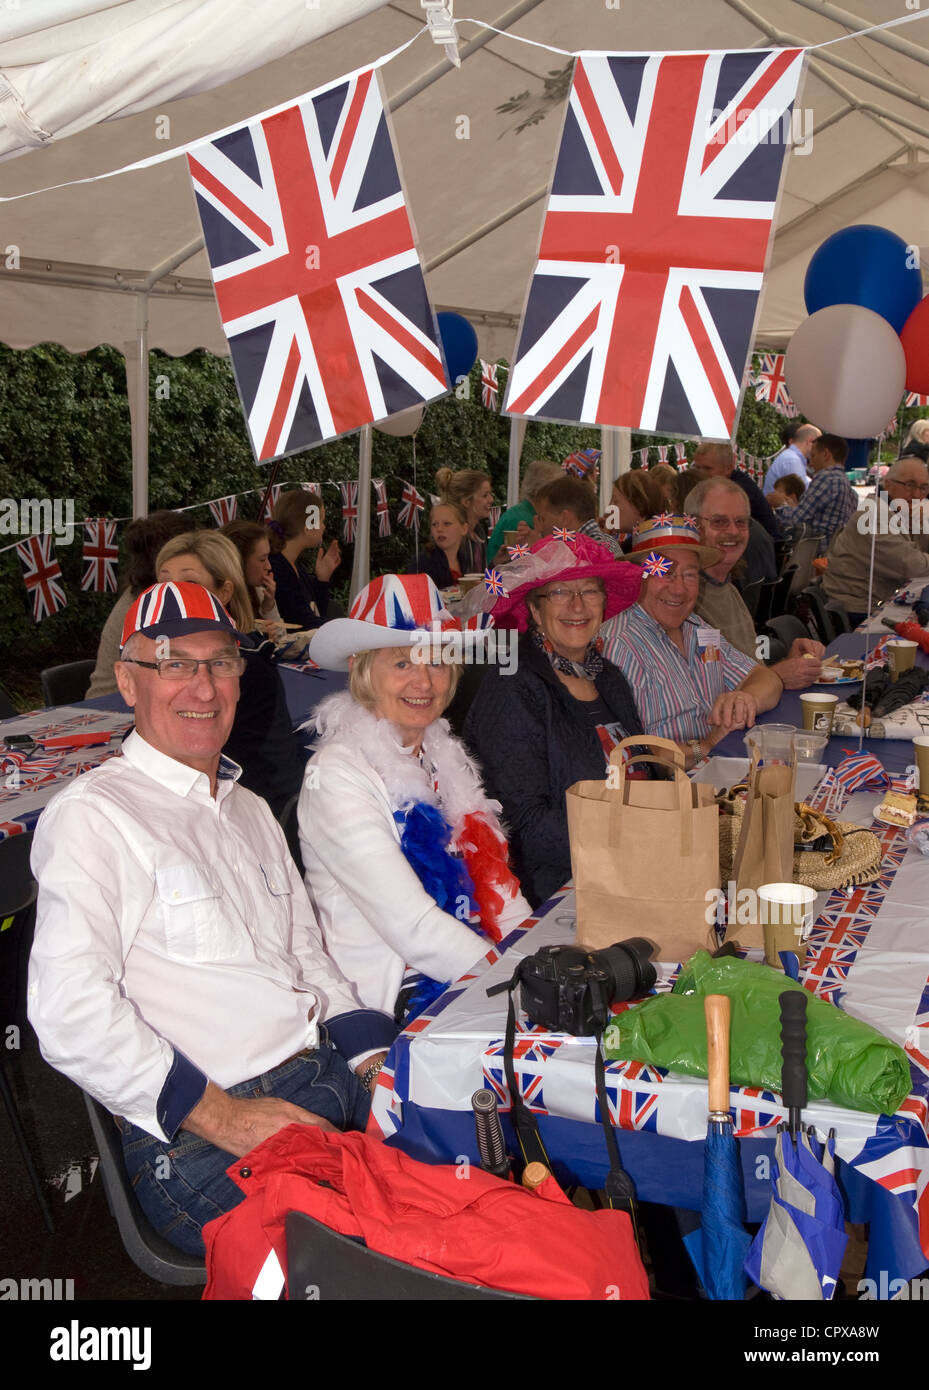 Street party in progress at the celebrations for the Queen's Diamond Jubilee, Rowledge Village, Surrey/Hampshire border, UK. Stock Photo